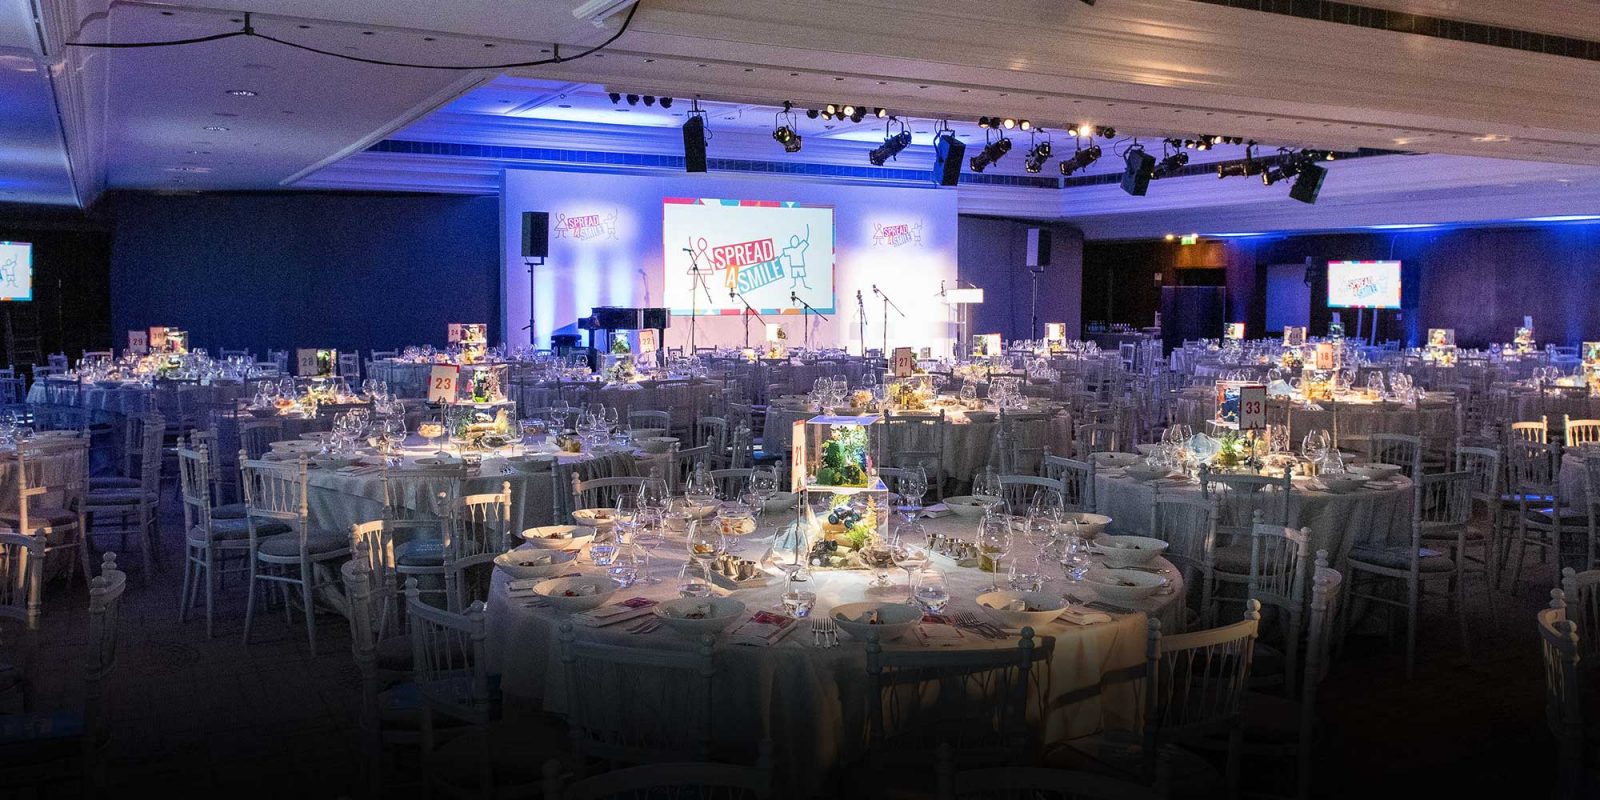 Charity Gala Event at the Intercontinental Park Lane